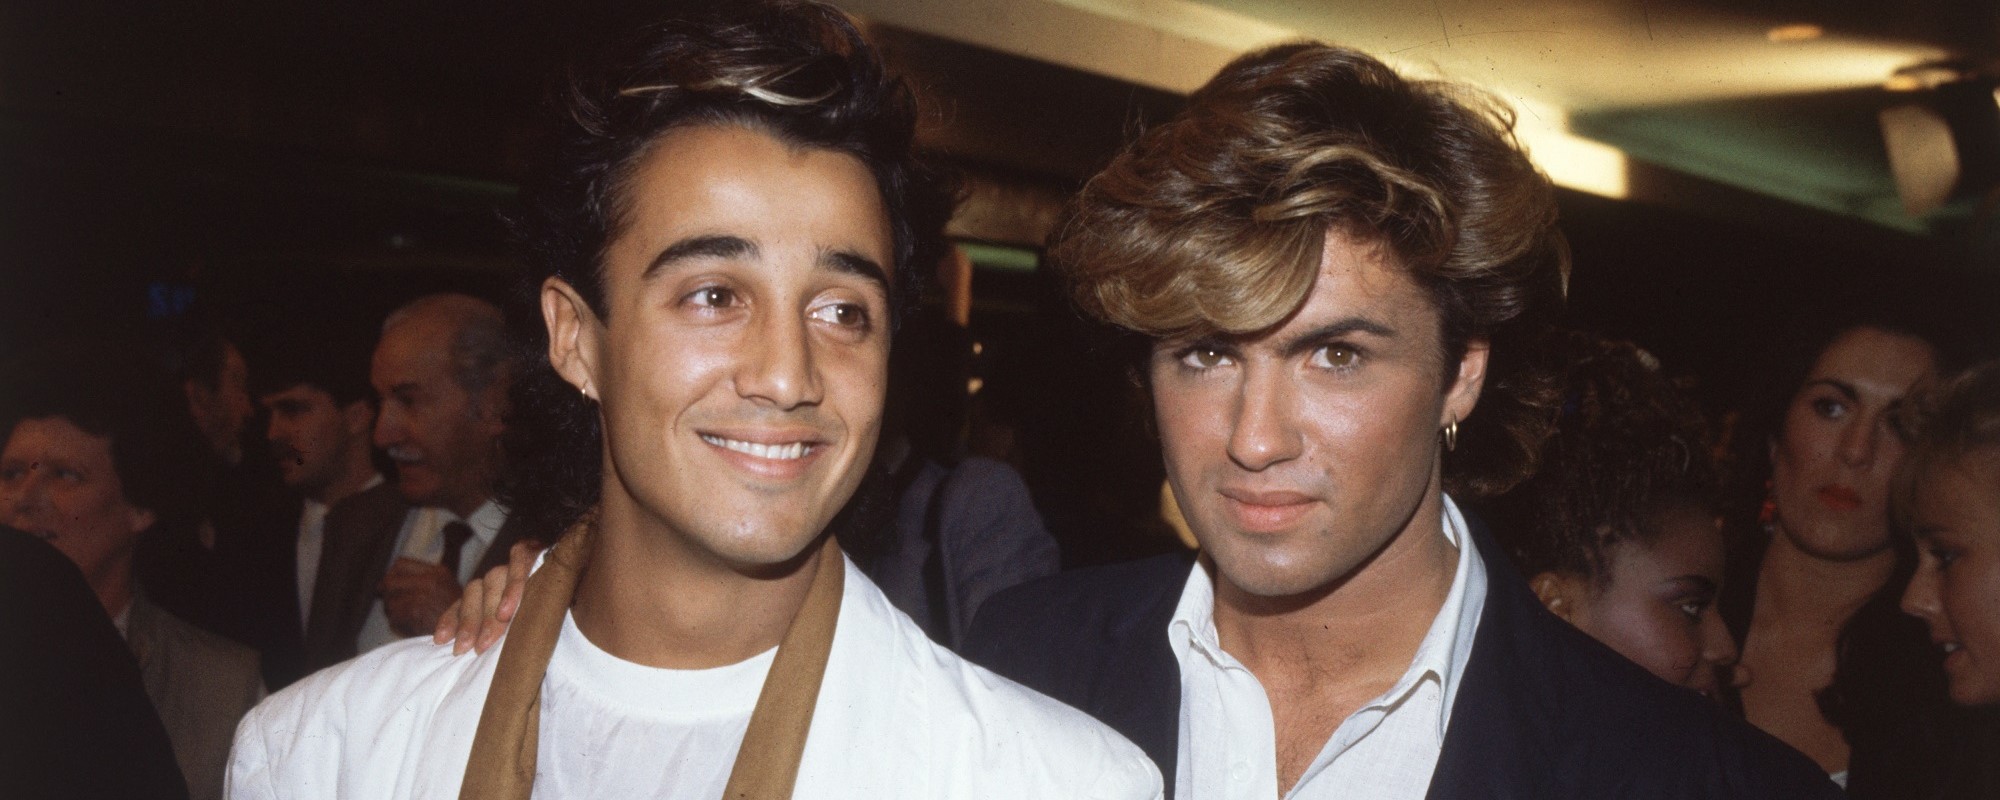 Wham!’s “Last Christmas” Makes U.K. Chart History 39 Years After Its Release